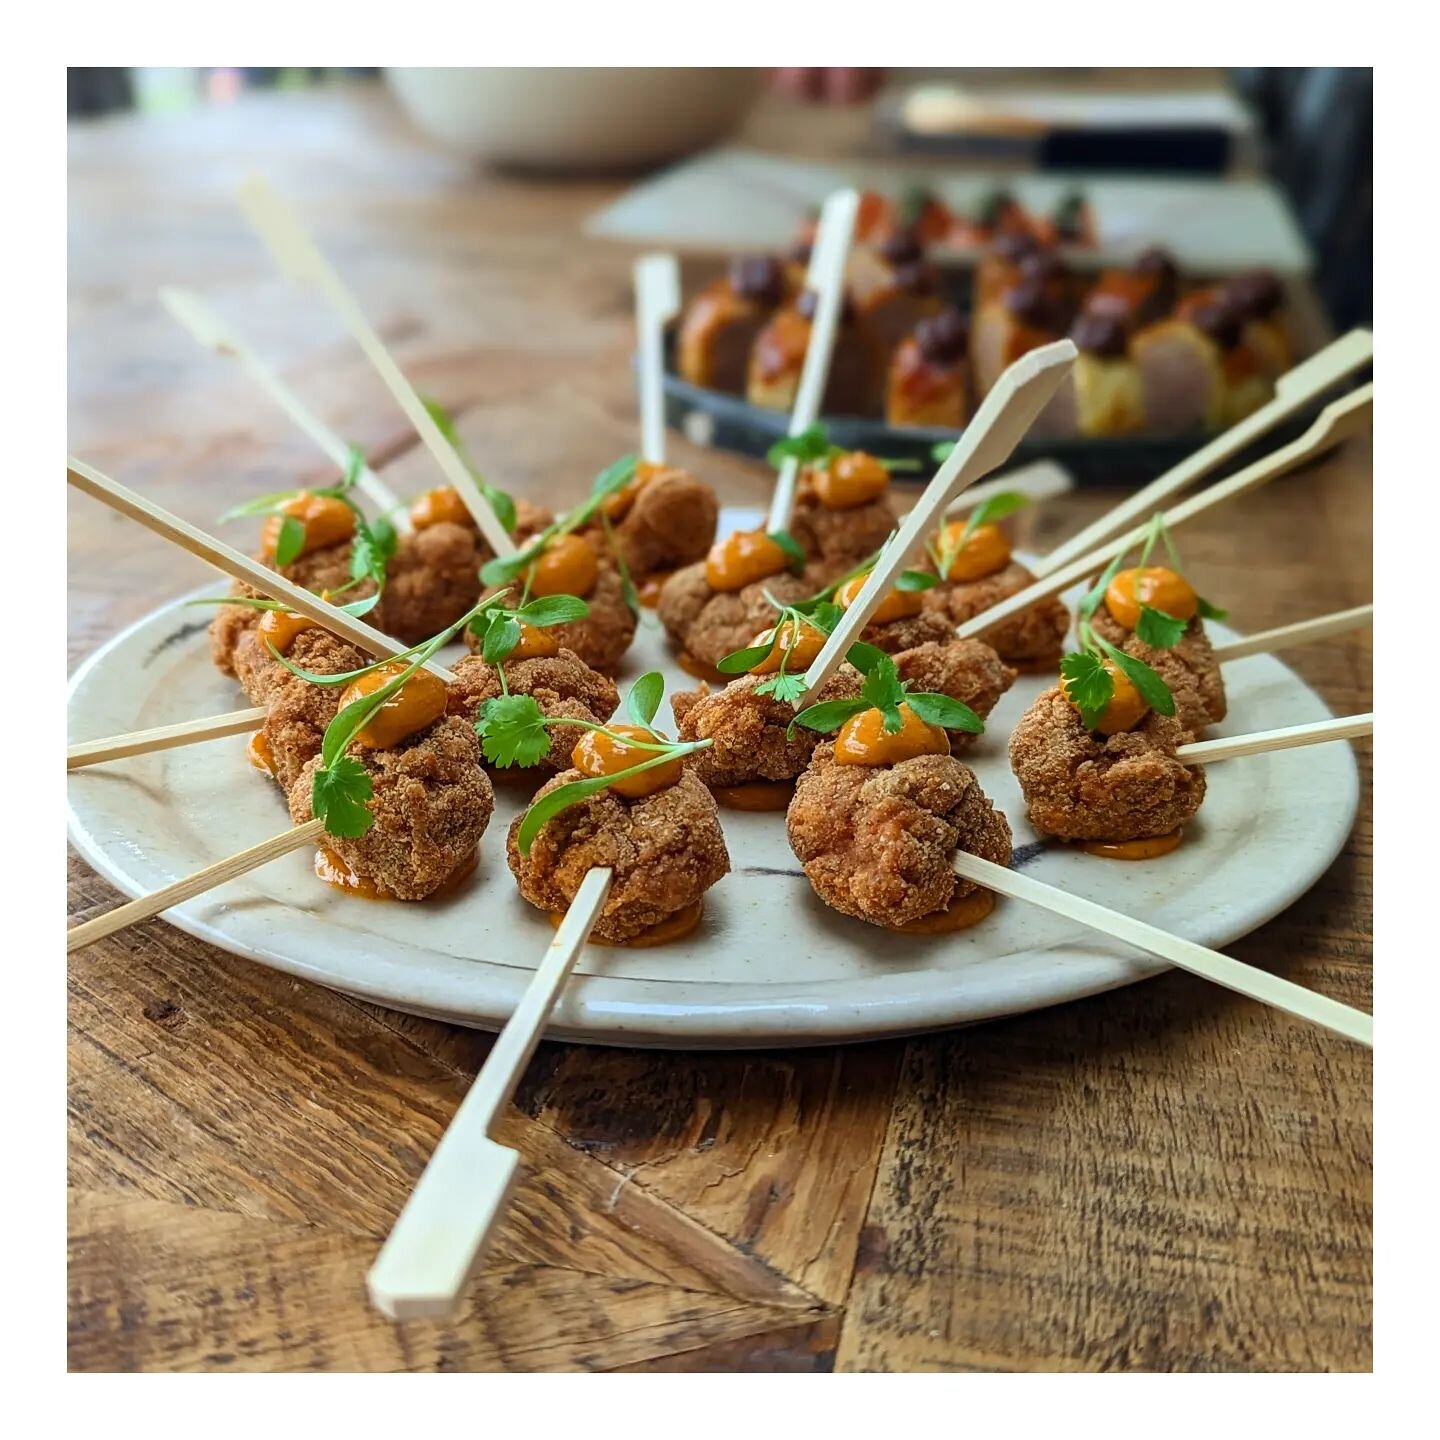 CRISPY 

Deliciously crispy and gluten-free! Our latest canape creation featured succulent chicken, zesty chipotle mayo, and fragrant coriander, all combined to create a flavor explosion in your mouth. 

Perfectly suited for any event, especially wed